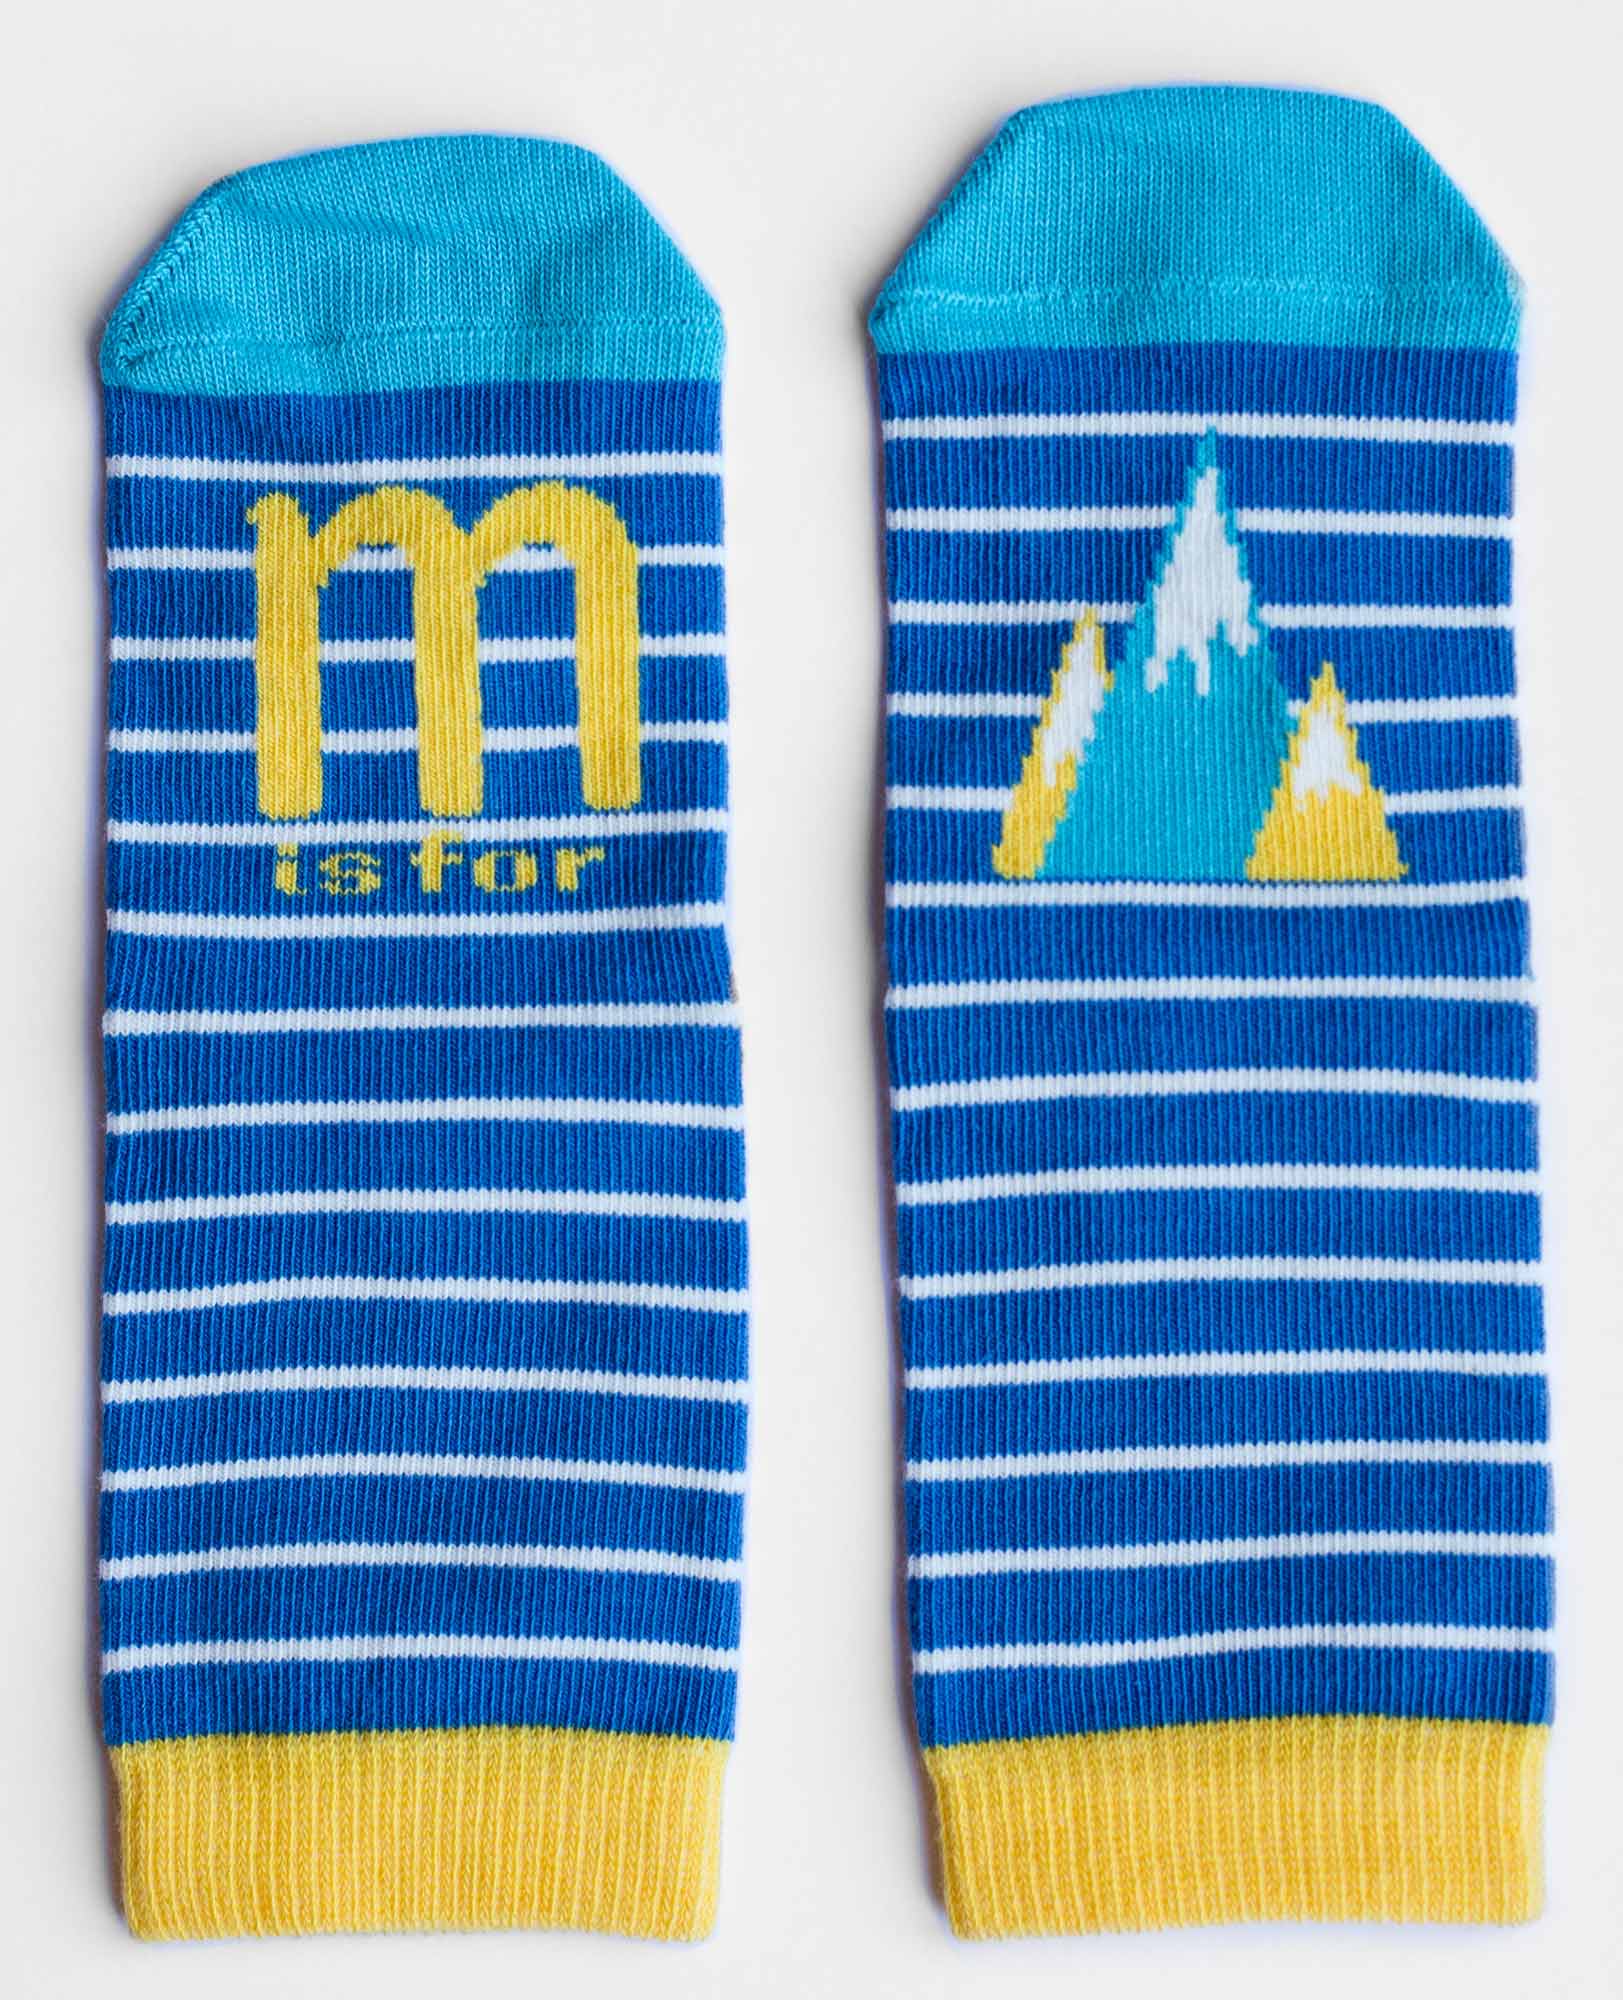 M is for mountain socks by Elly Jahnz for Socks and Stripes